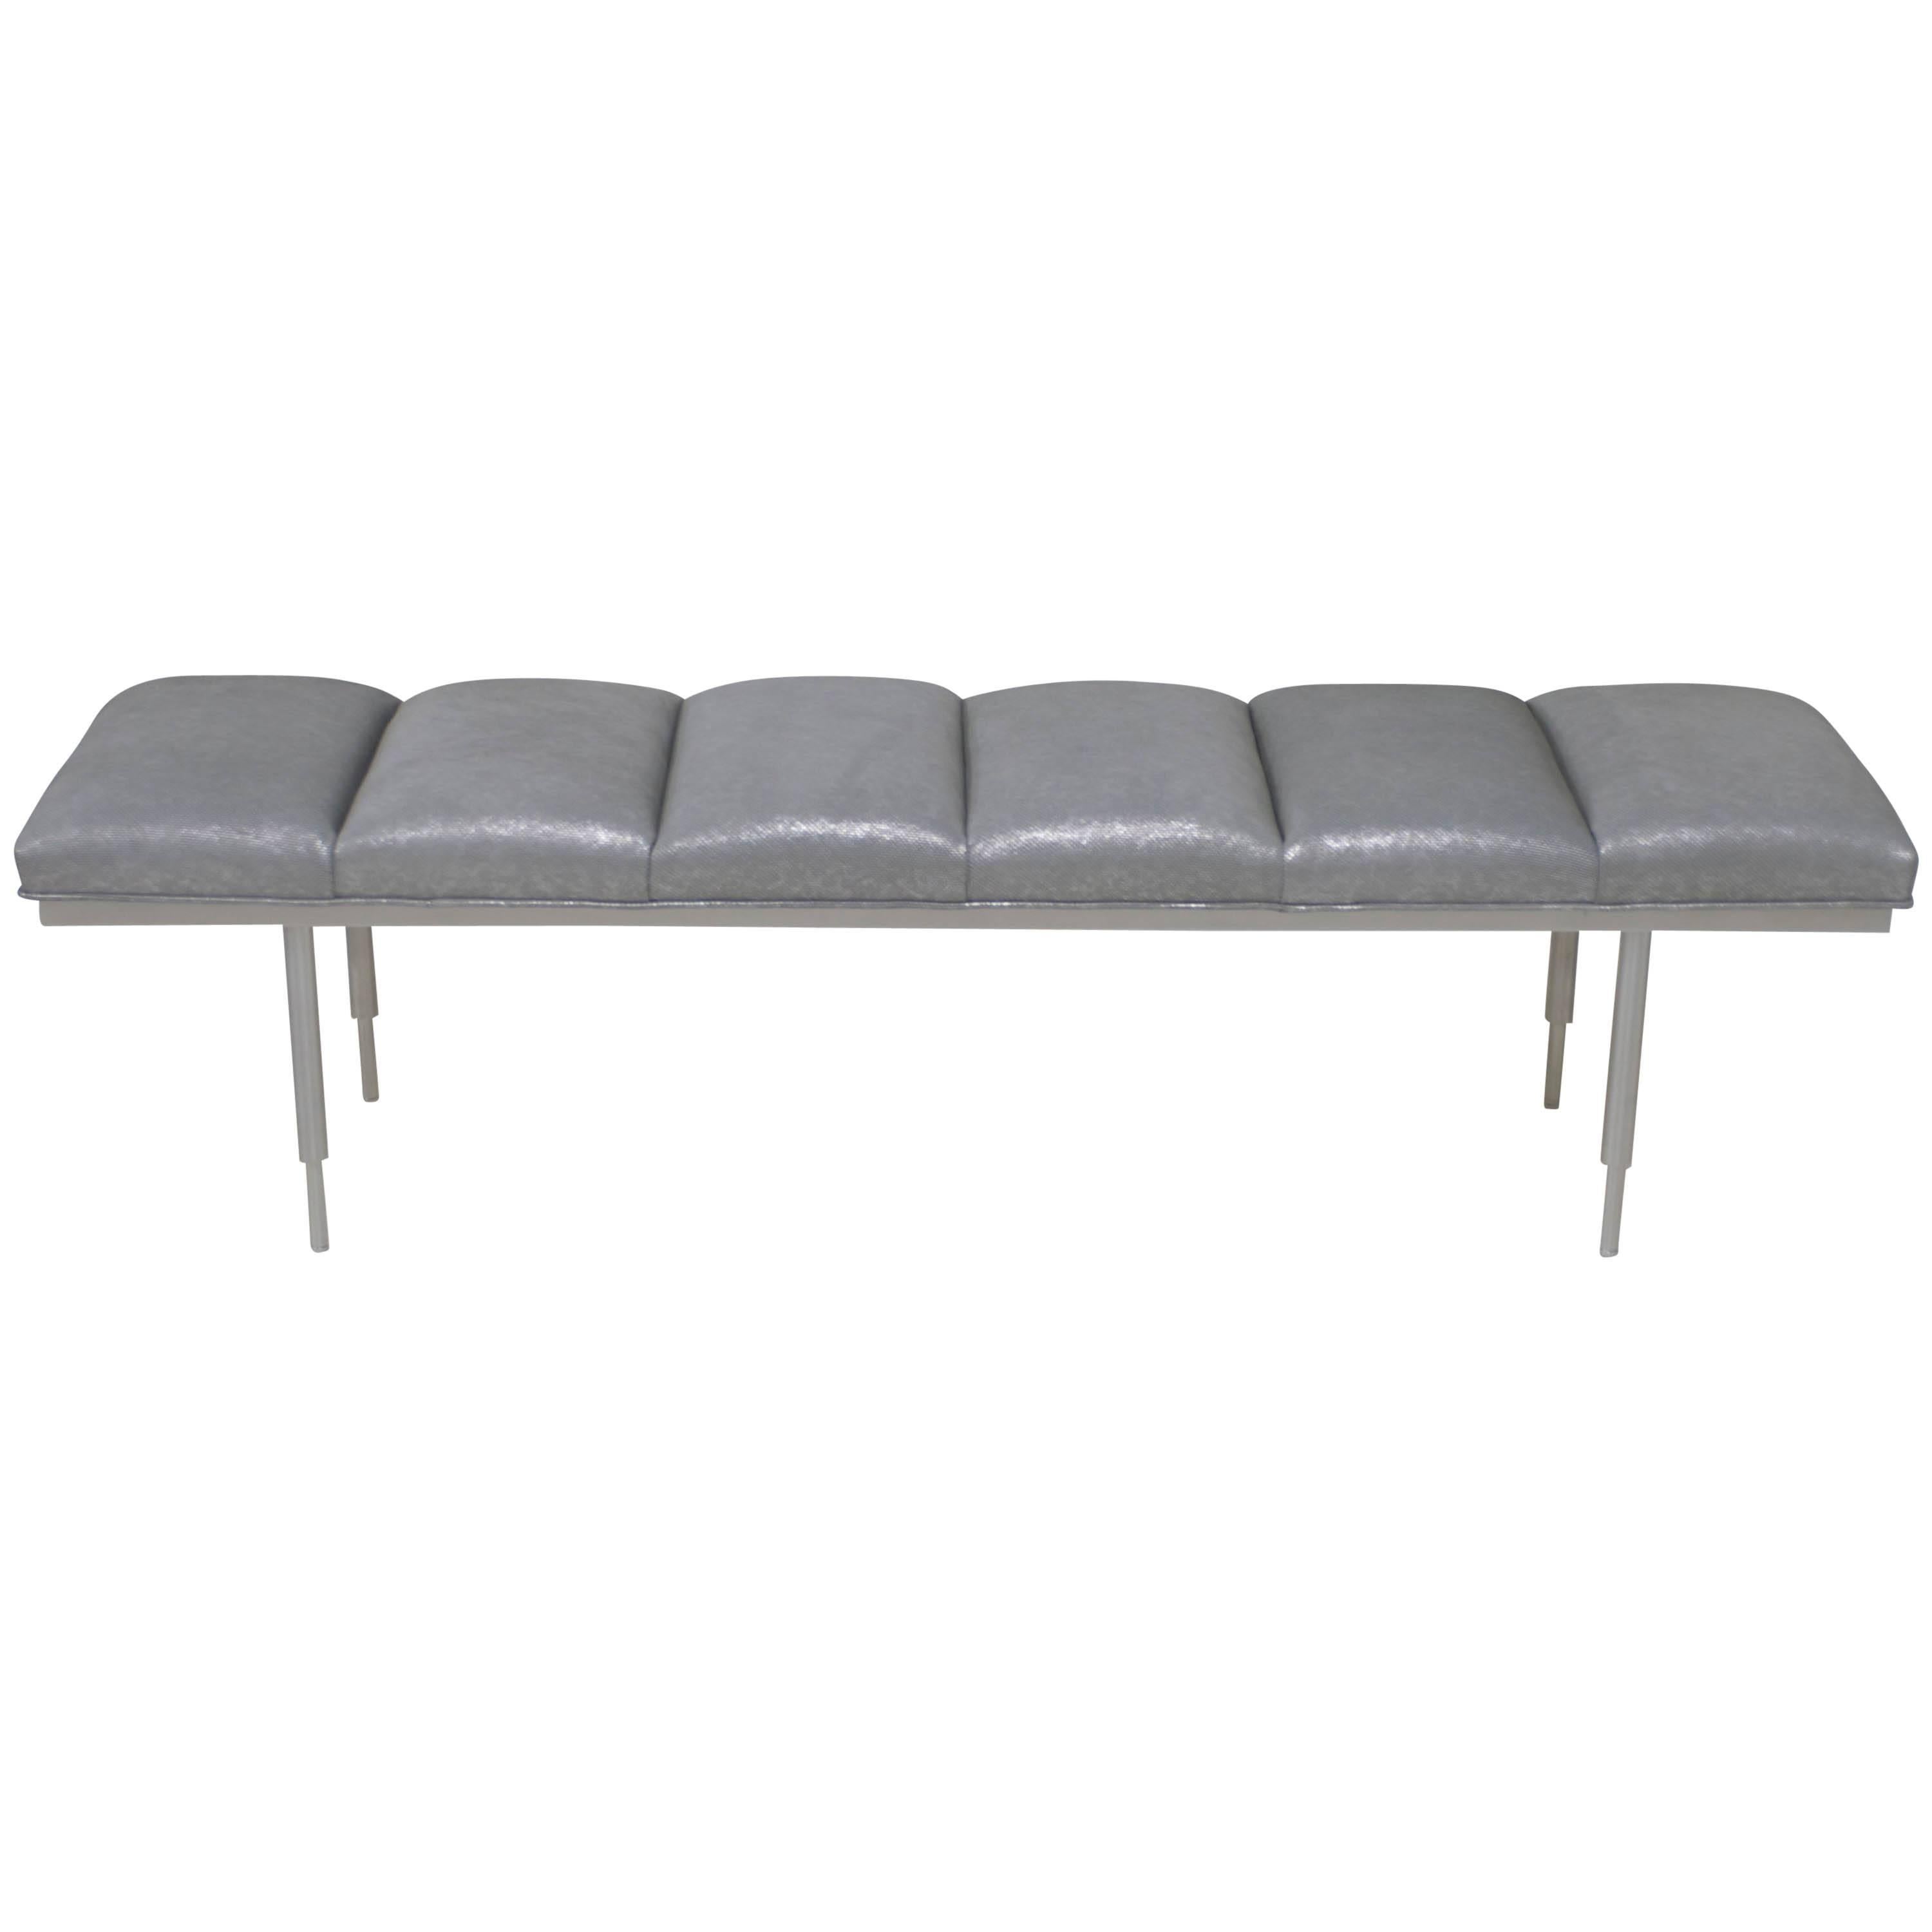 Channel Tufted Modernist Leather Mid-Century Aluminum Bench